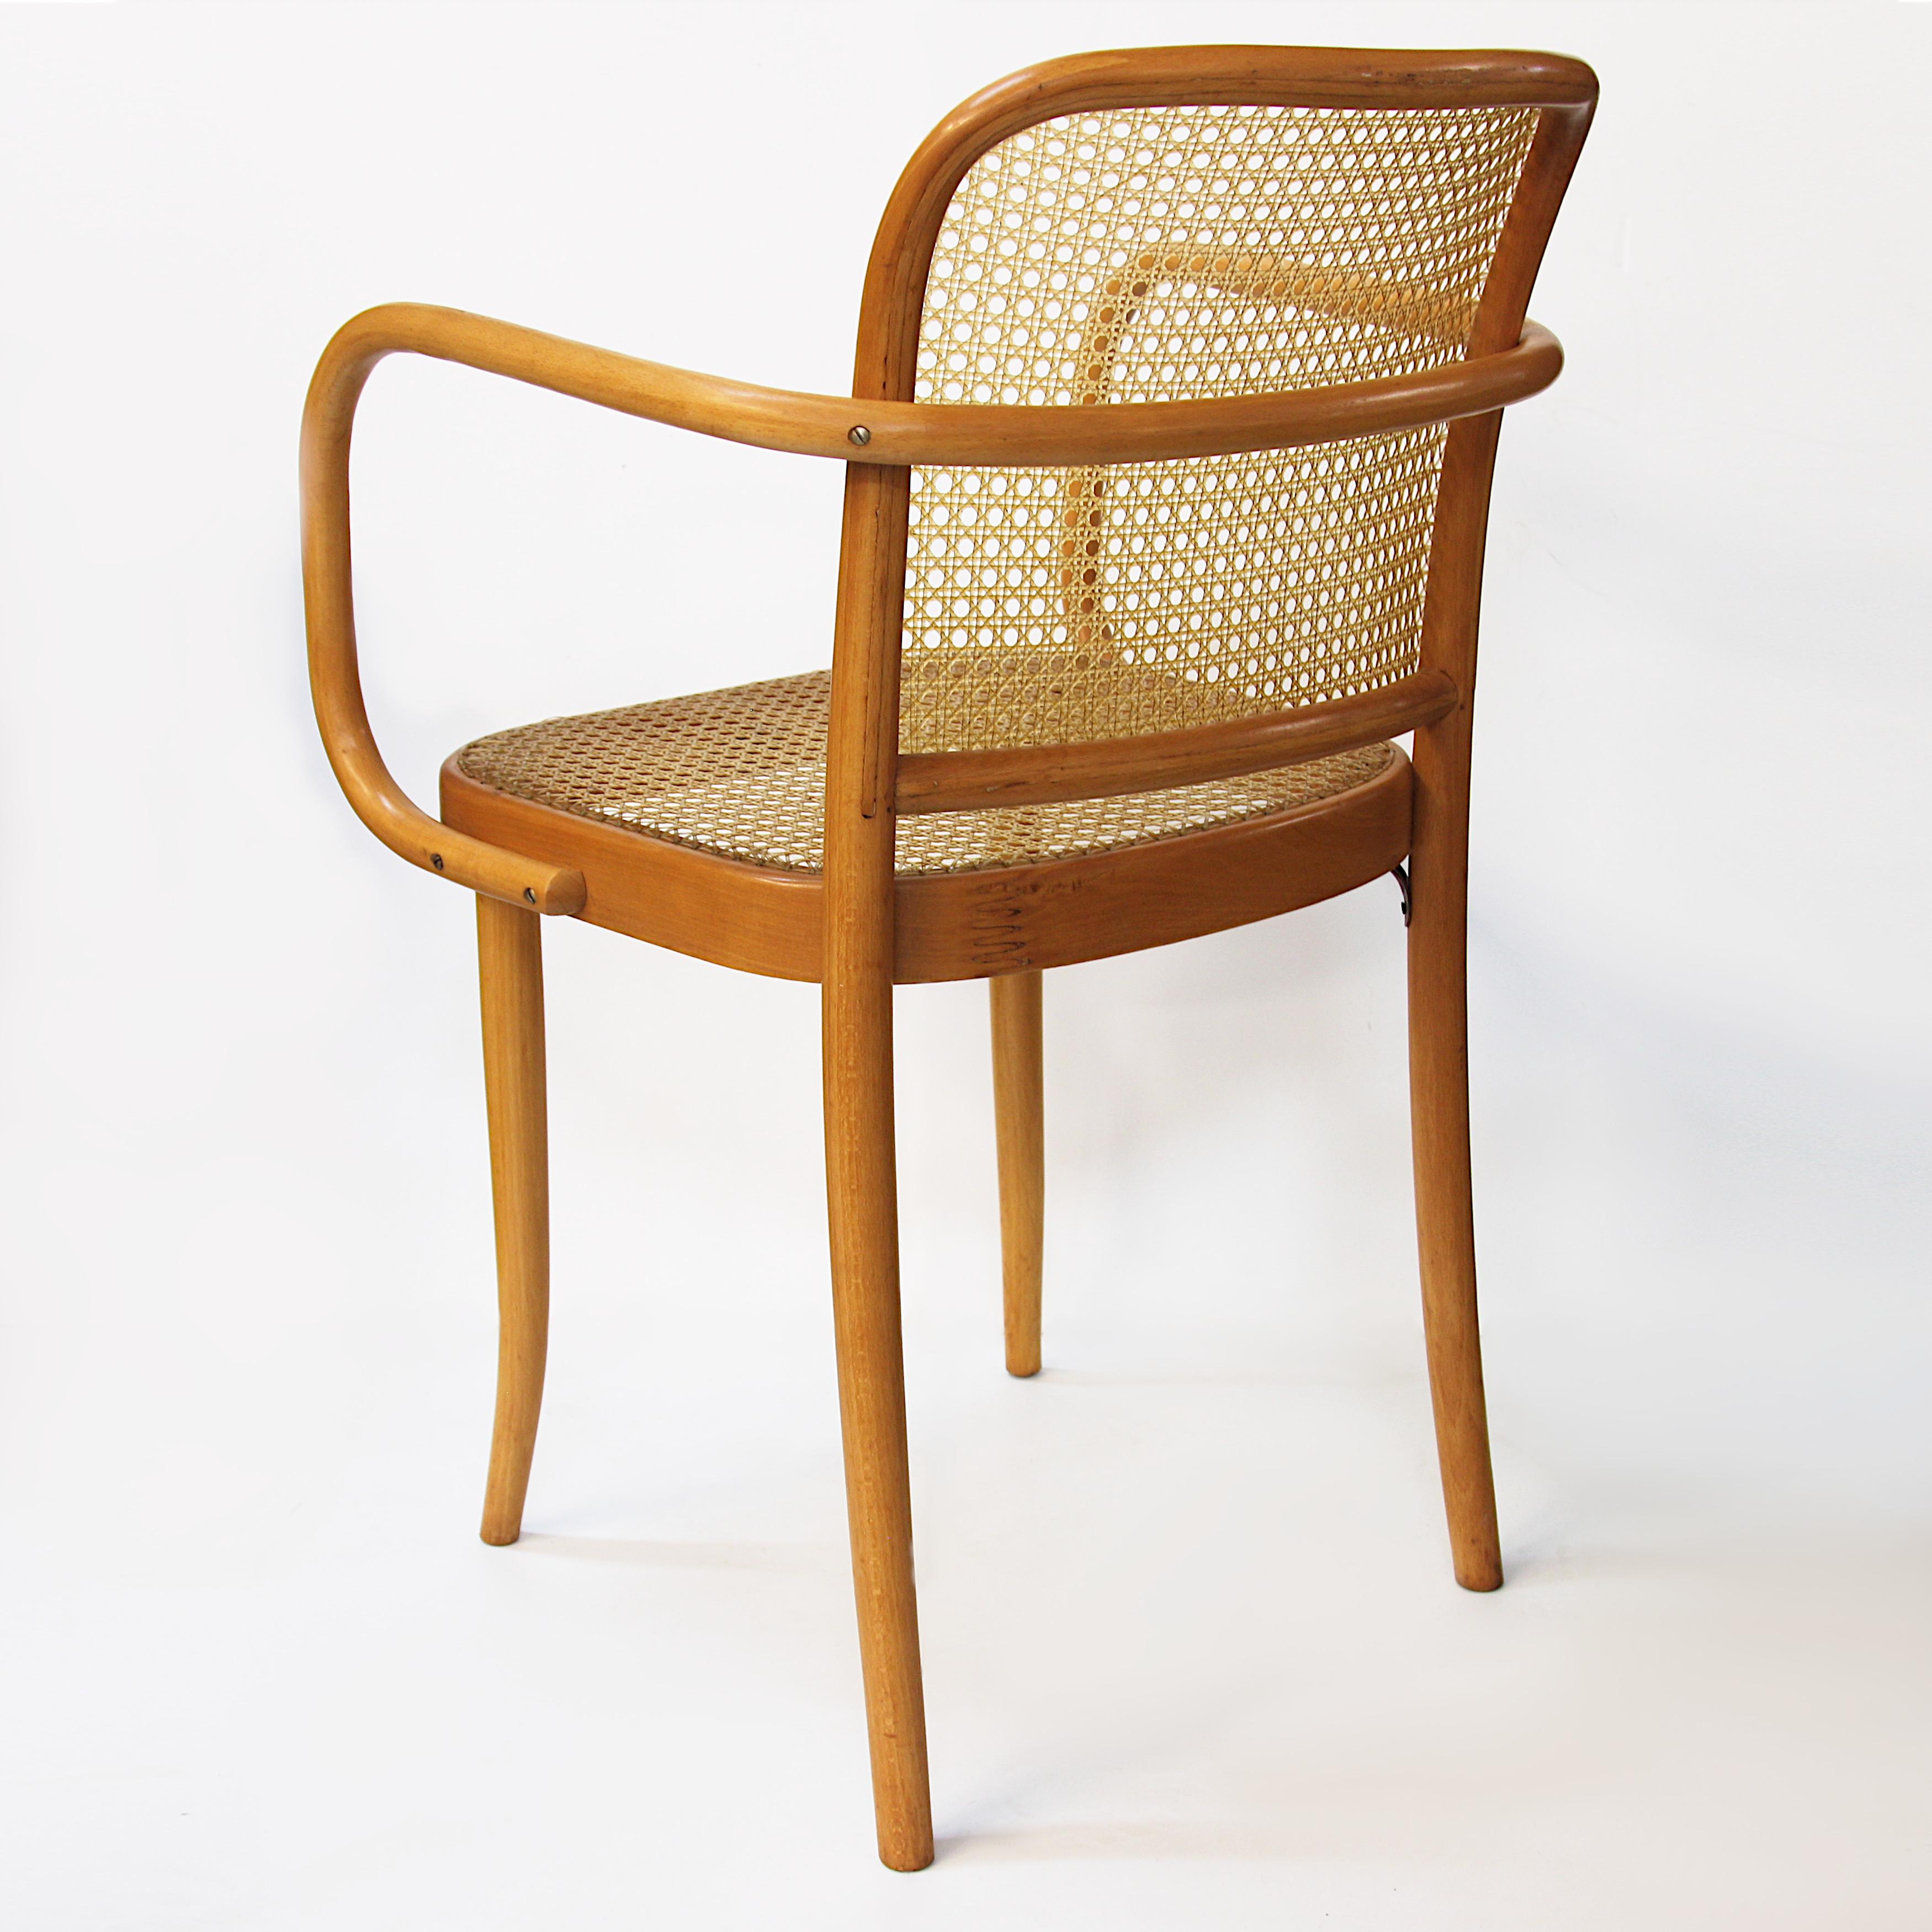 Mid-20th Century Set of 4 Vintage Bentwood Dining 811 Prague Chairs by Josef Hoffmann for Stendig